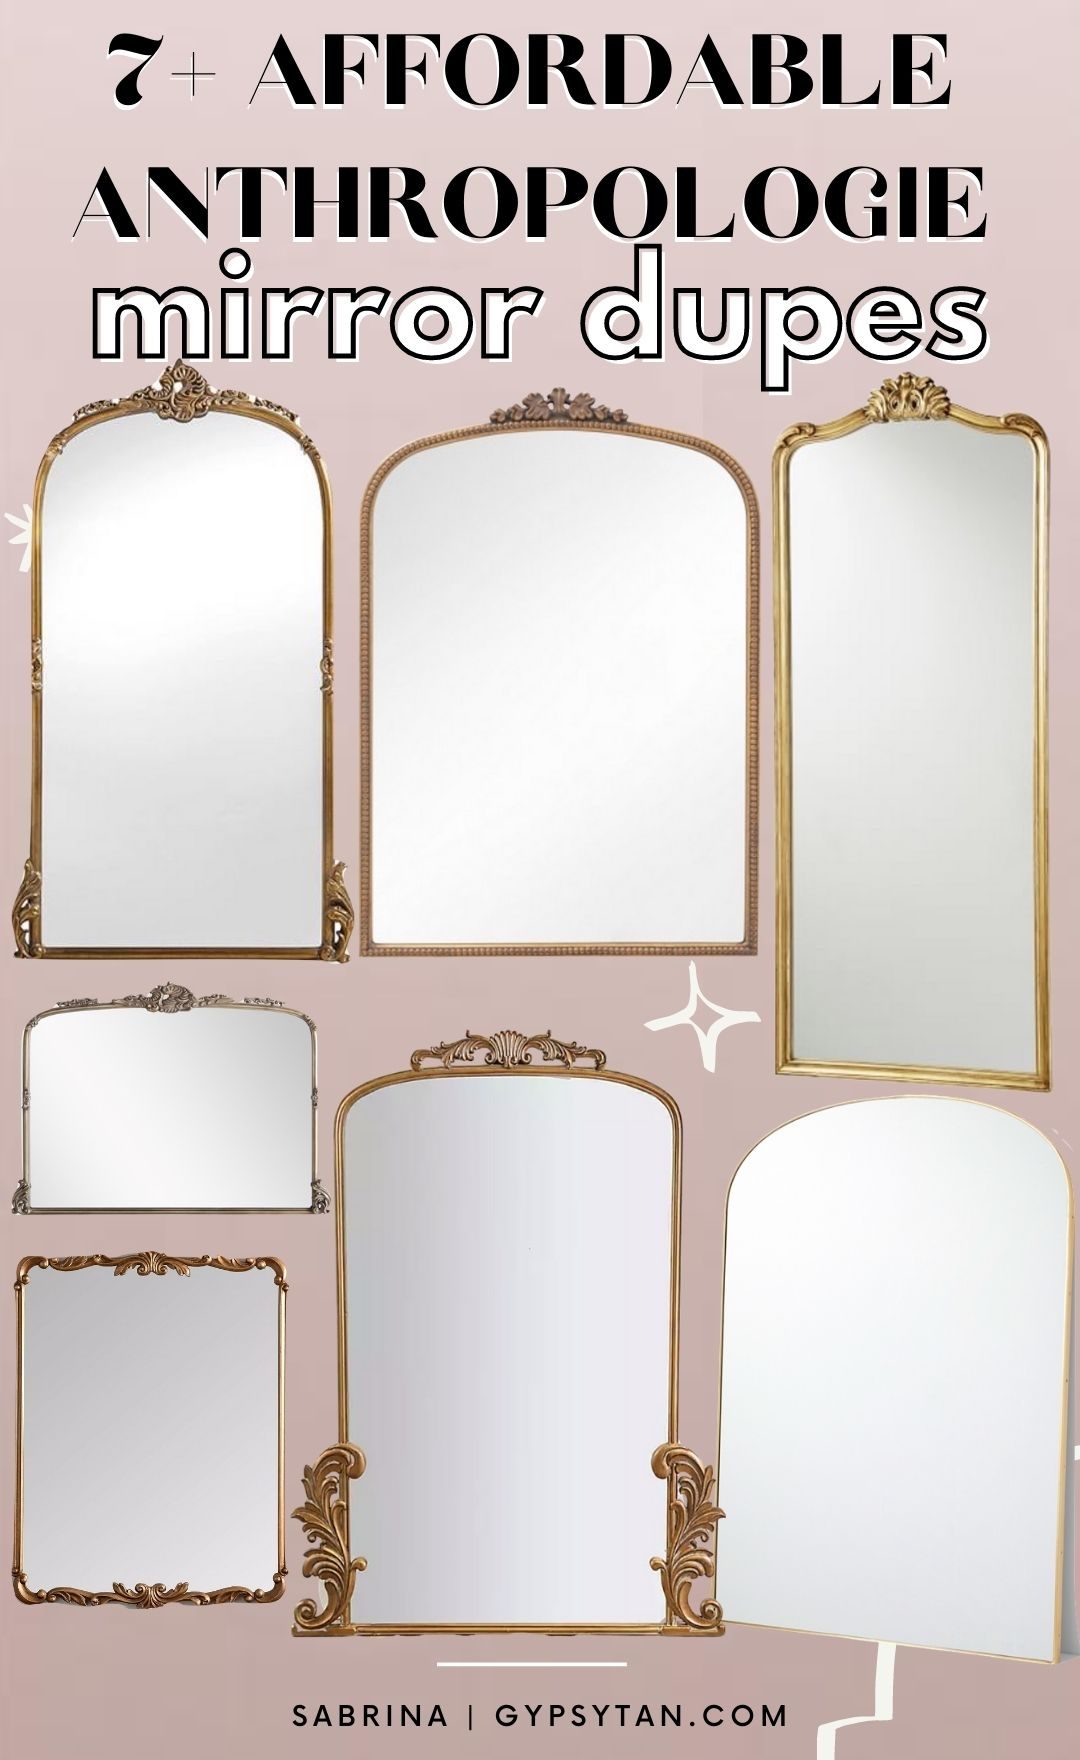 7 Affordable Anthropologie Mirror Dupe, Large Gold Floor Mirror Anthropologie